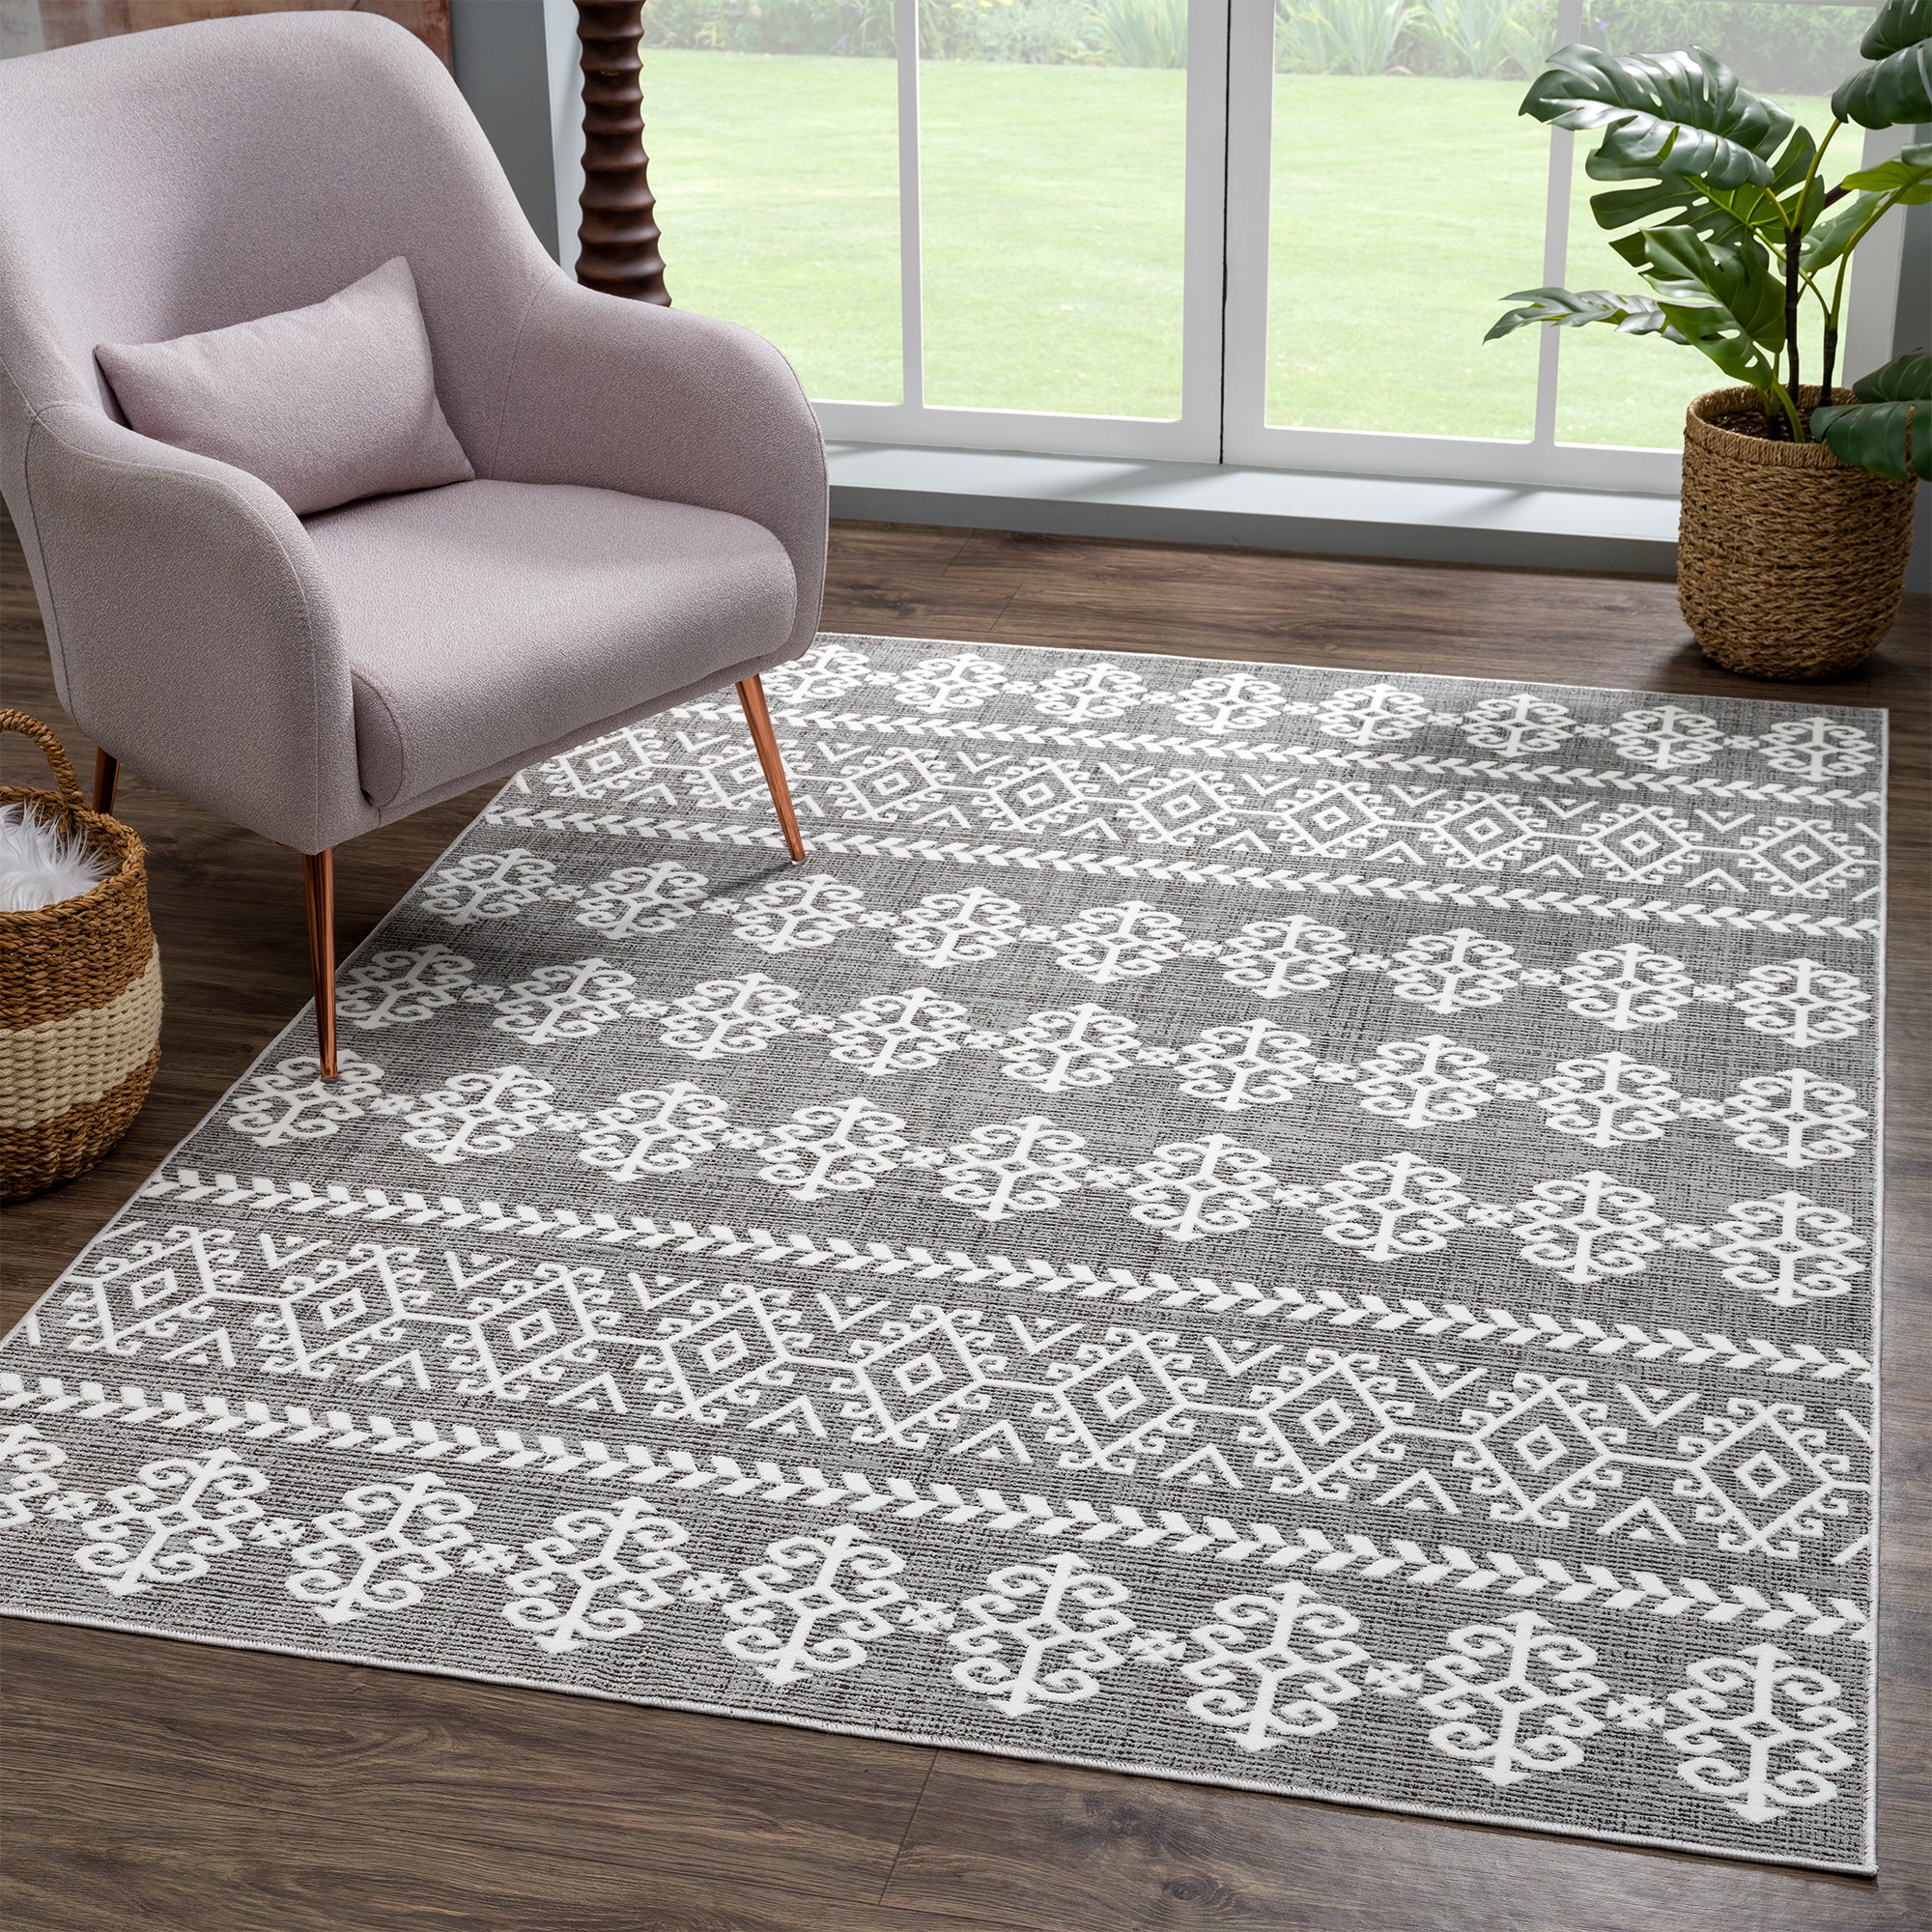 United Weavers Paramount Influential 2660-50172 Grey Rug